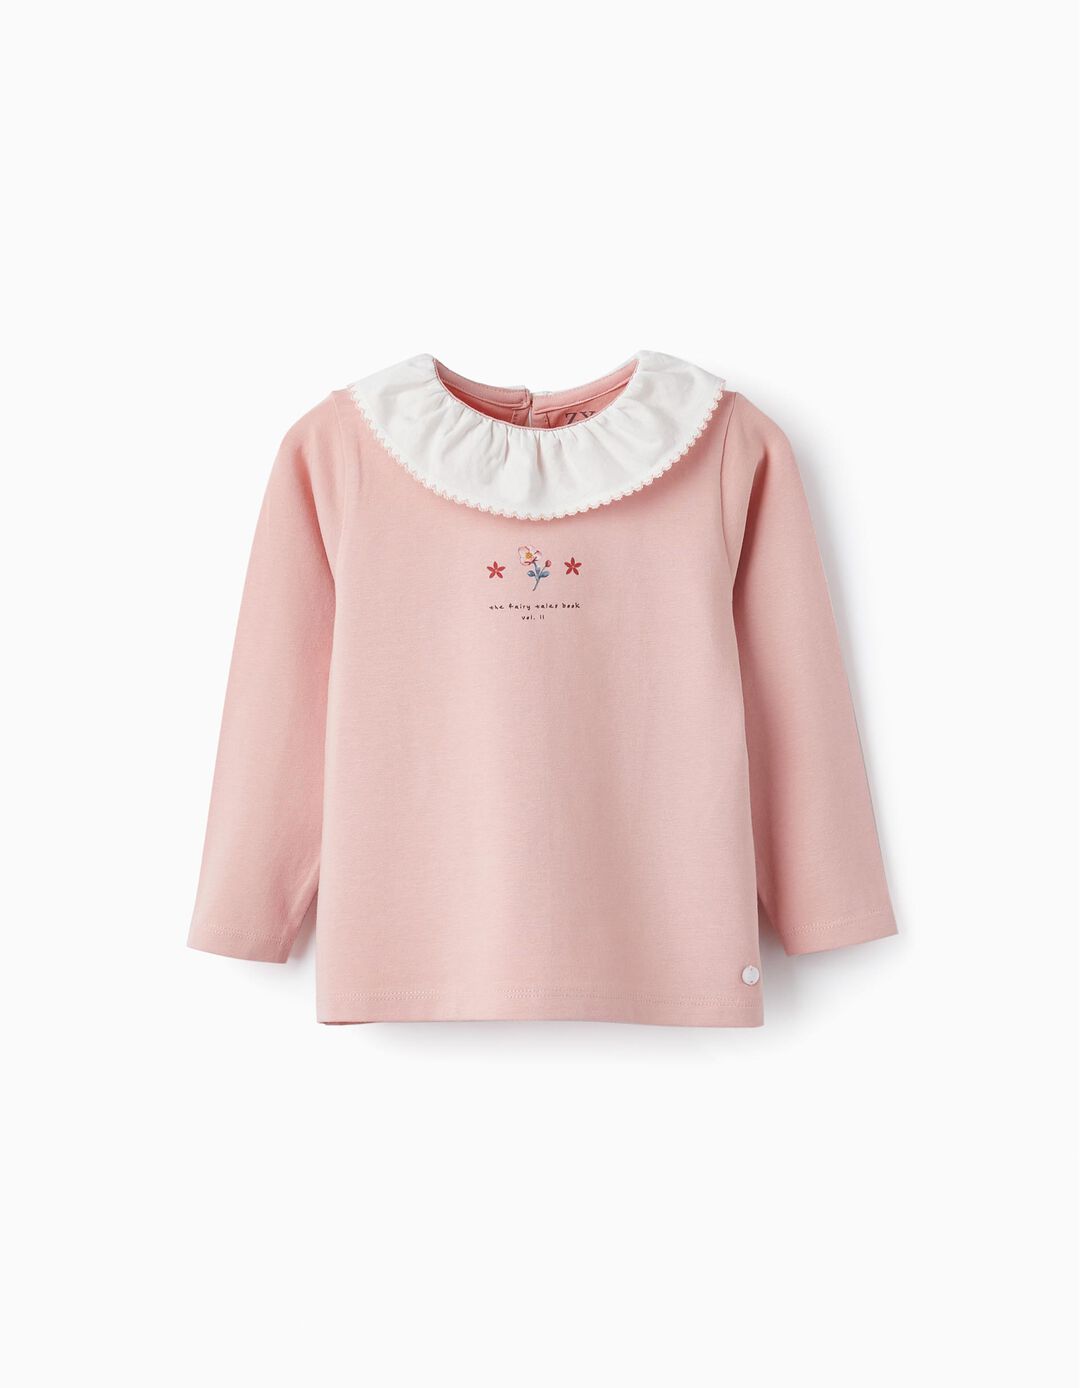 T-Shirt in Cotton Jersey with Ruffle for Baby Girls, Light Pink